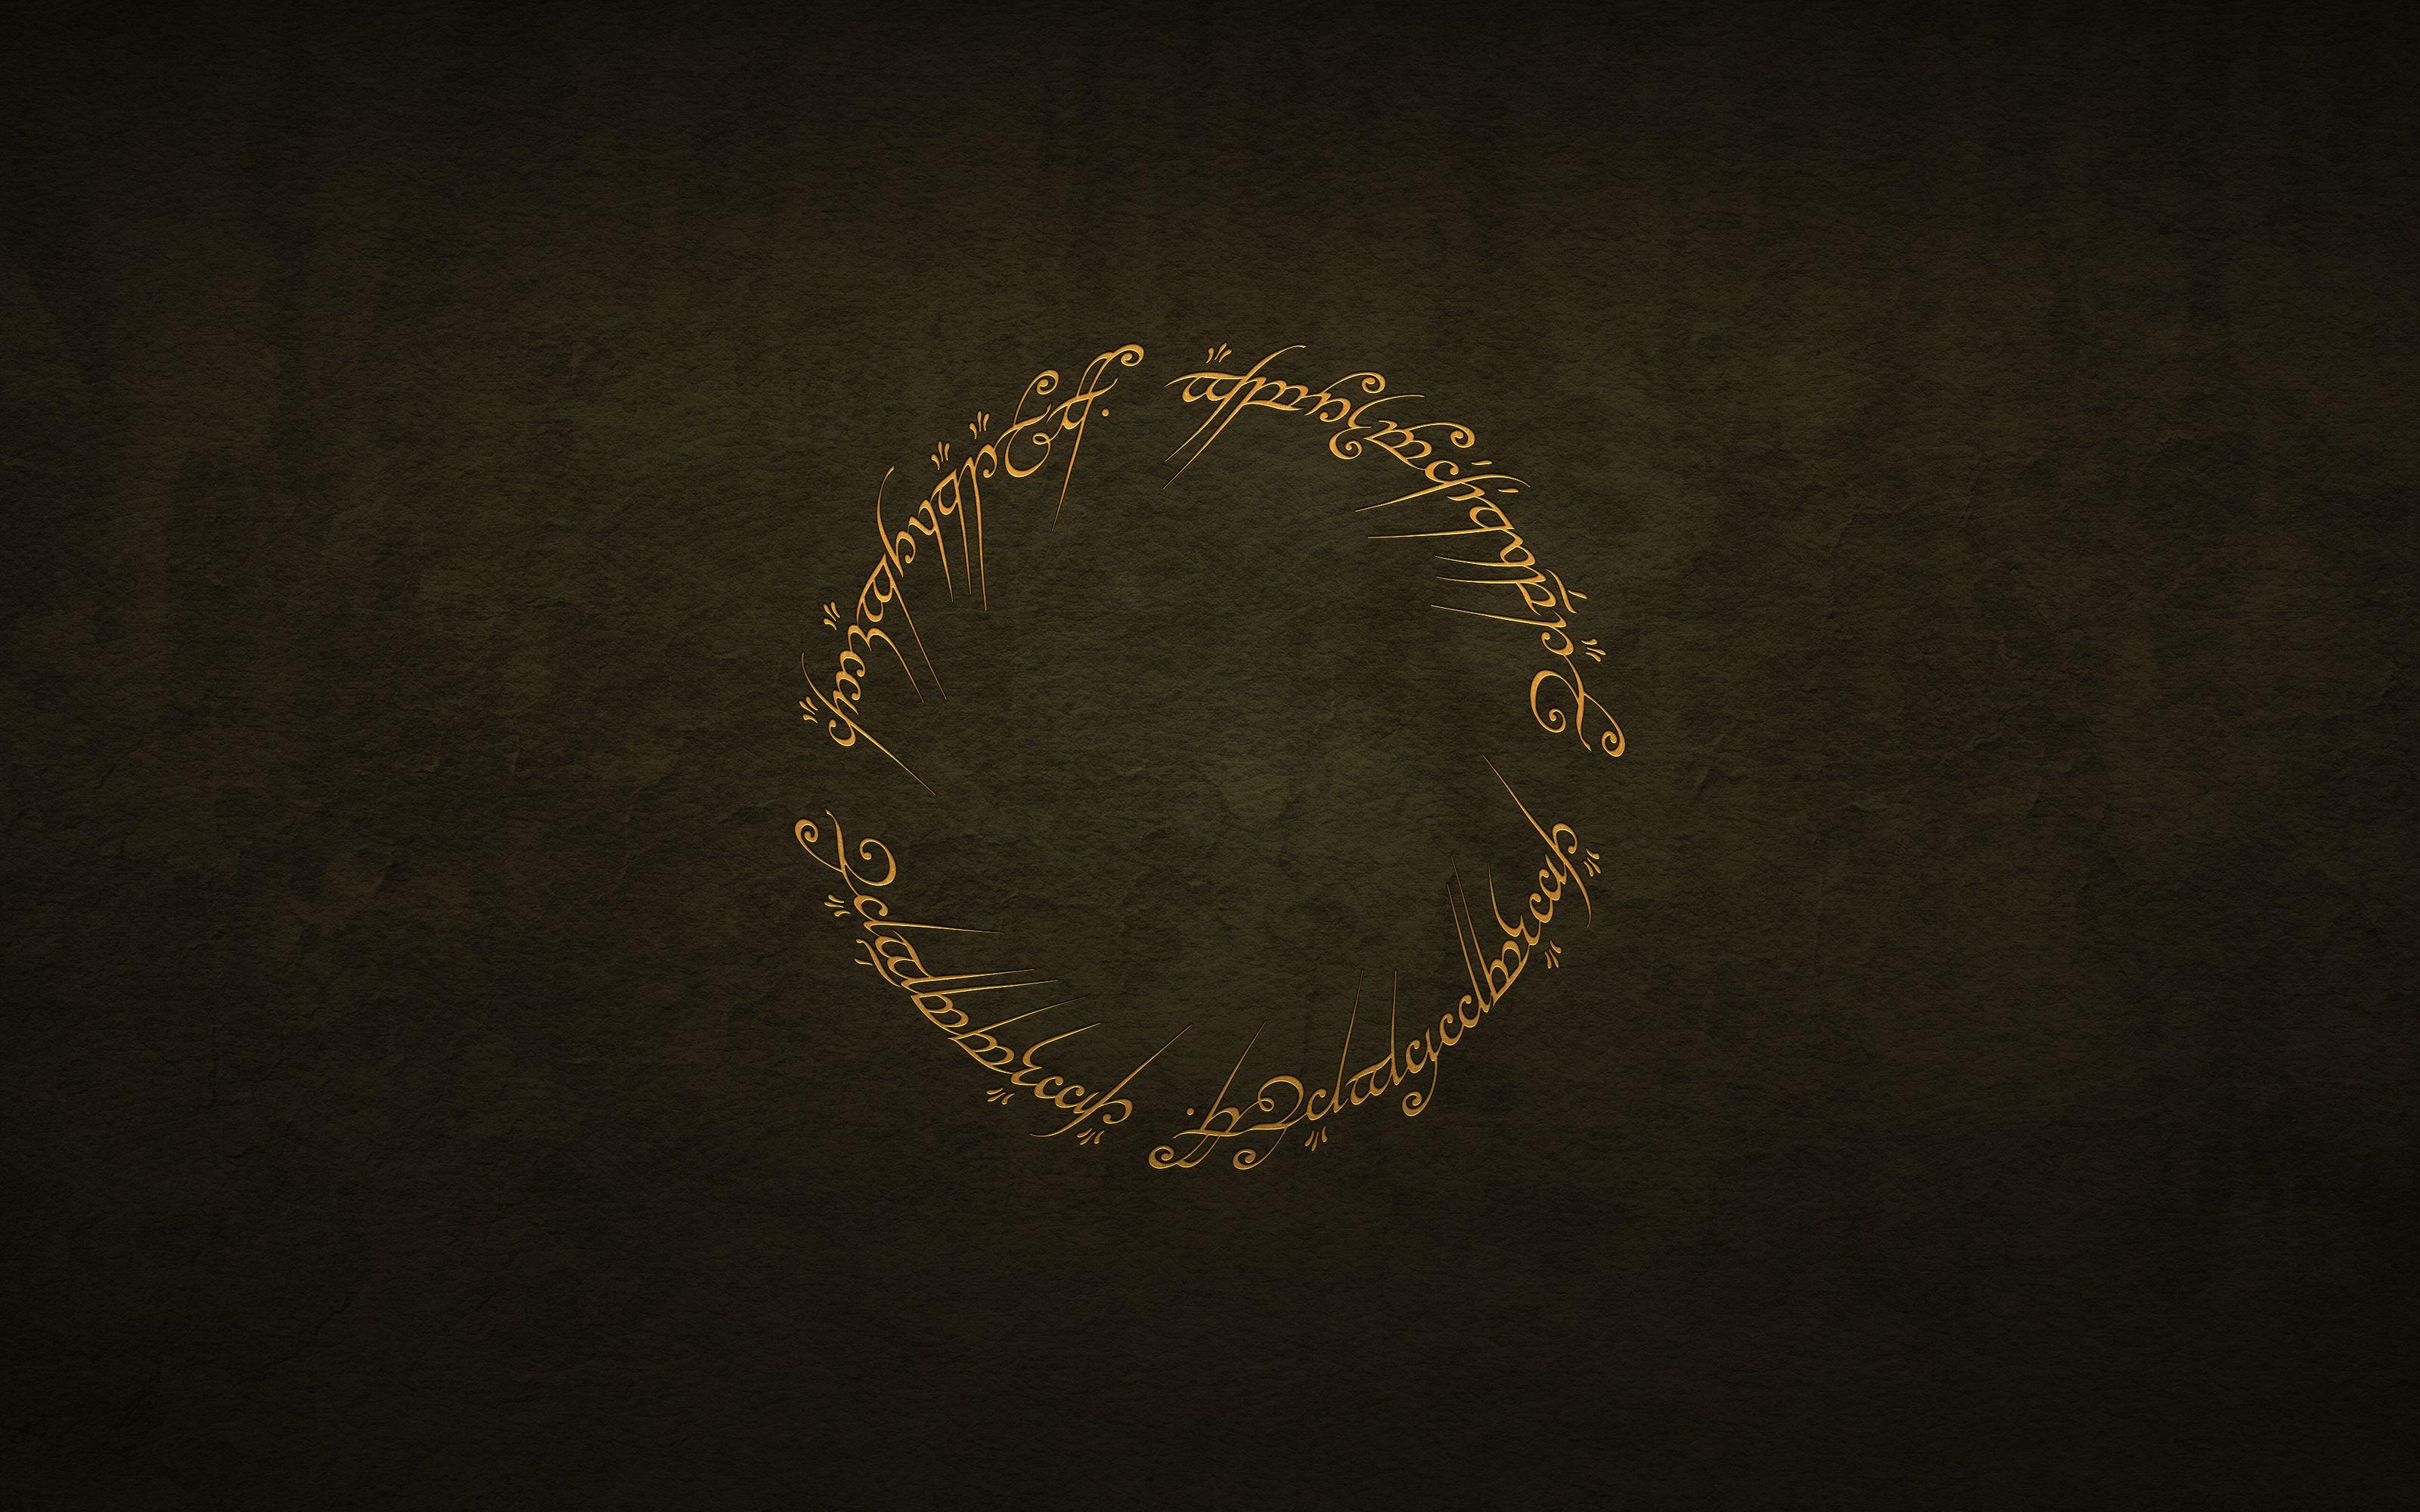 The Lord of the Rings: The Fellowship of the Ring Wallpaper 21